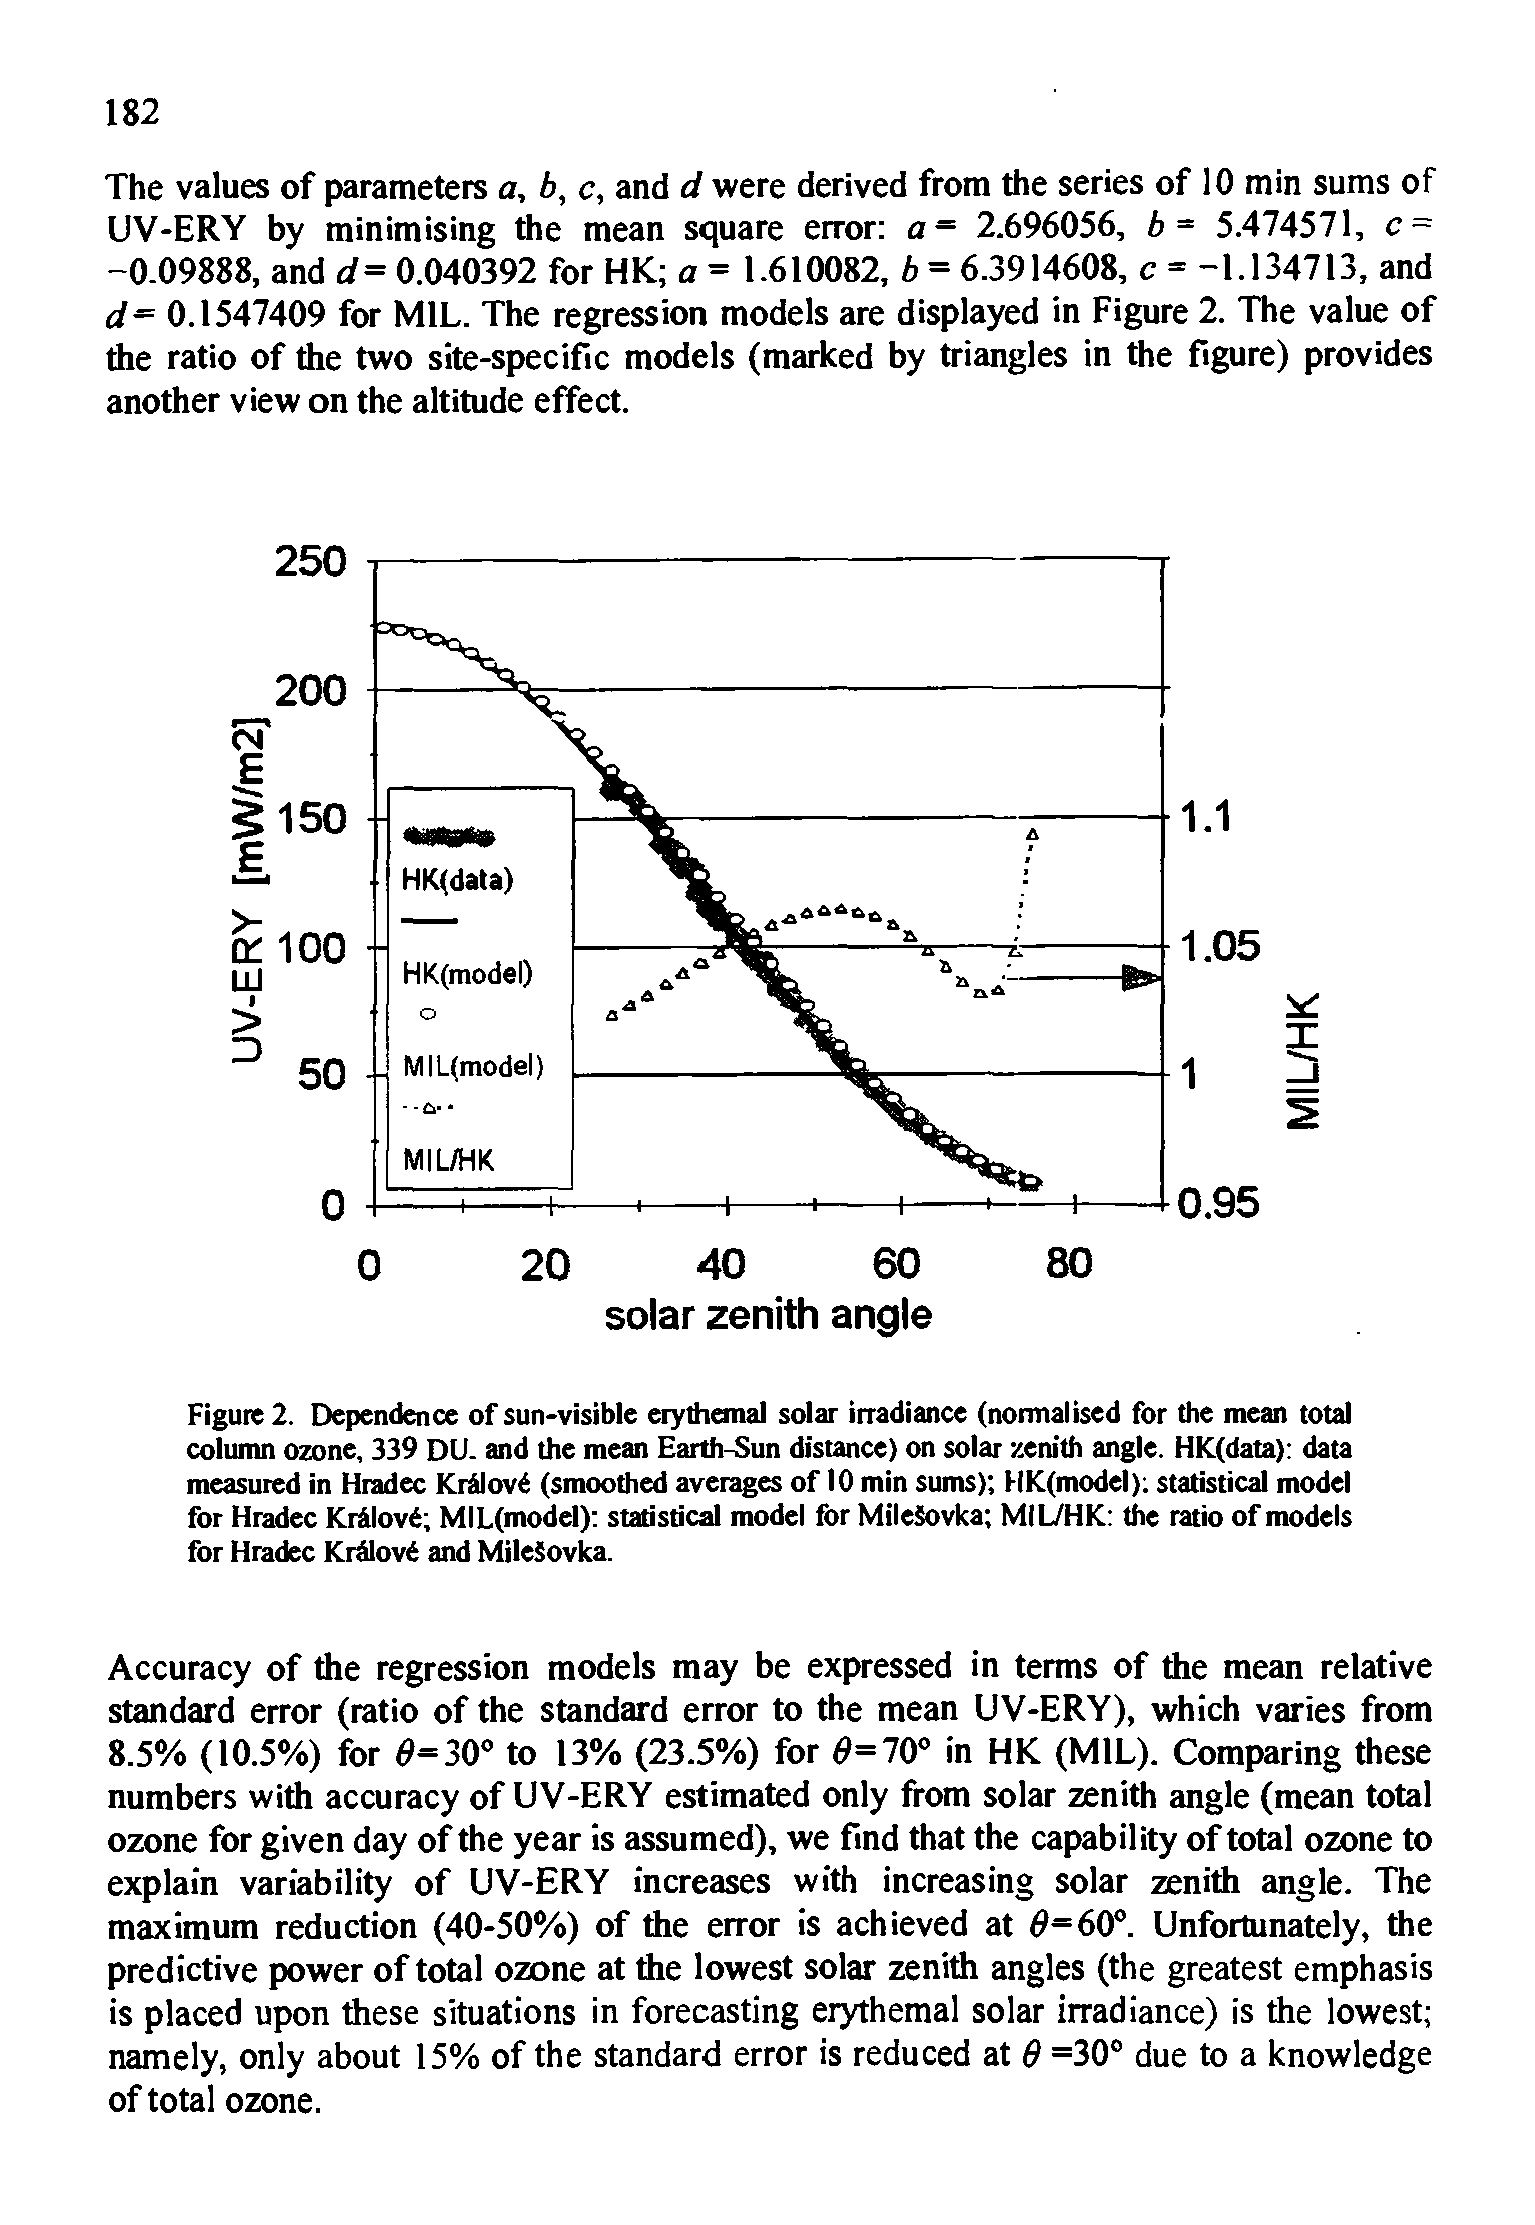 Figure 2. Dependence of sun-visible eiythemal solar irradiance (normalised for the mean total column ozone, 339 DU. and the mean Earth-Sun distance) on solar zenith angle. HIC(data) data measured in Hradec Kr lovd (smoothed averages of 10 min sums) HK(model) statistical model for Hradec Krilovi MIL(model) statistical model for MileSovka MIL/HK the ratio of models for Hradec Krdlovi and MileSovka.